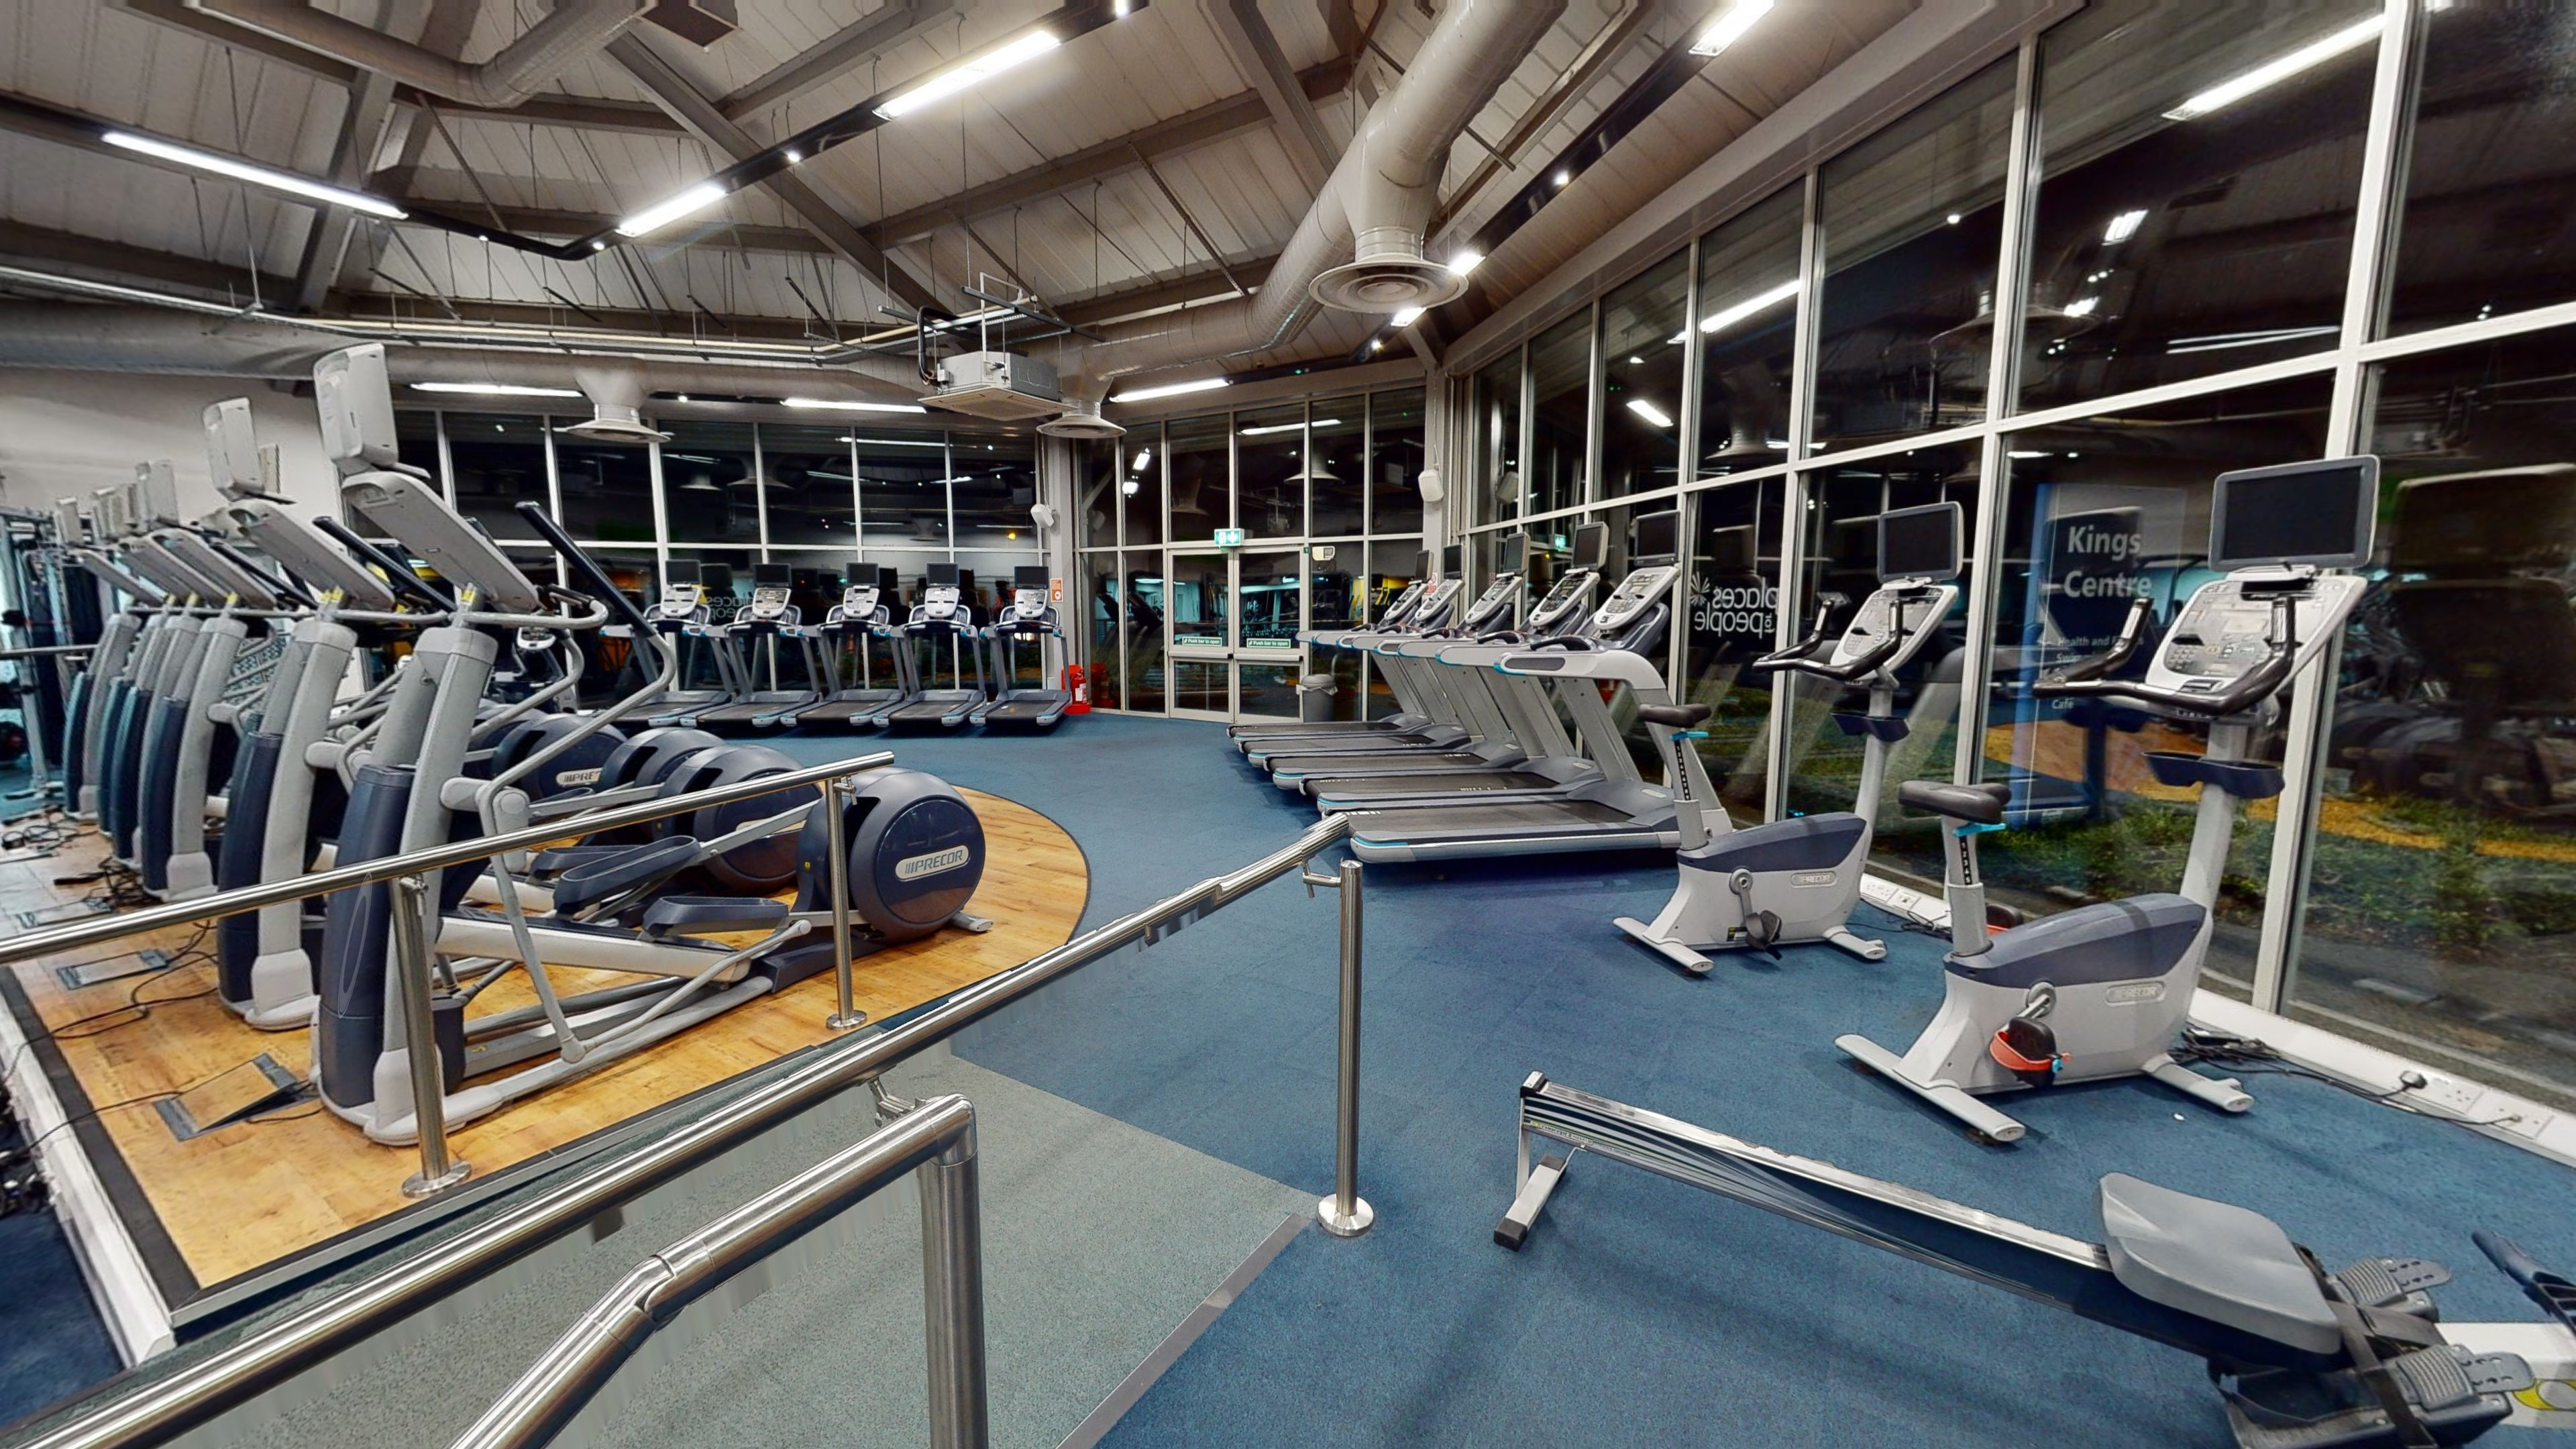 Gym at Kings Centre Kings Centre East Grinstead 01342 328616